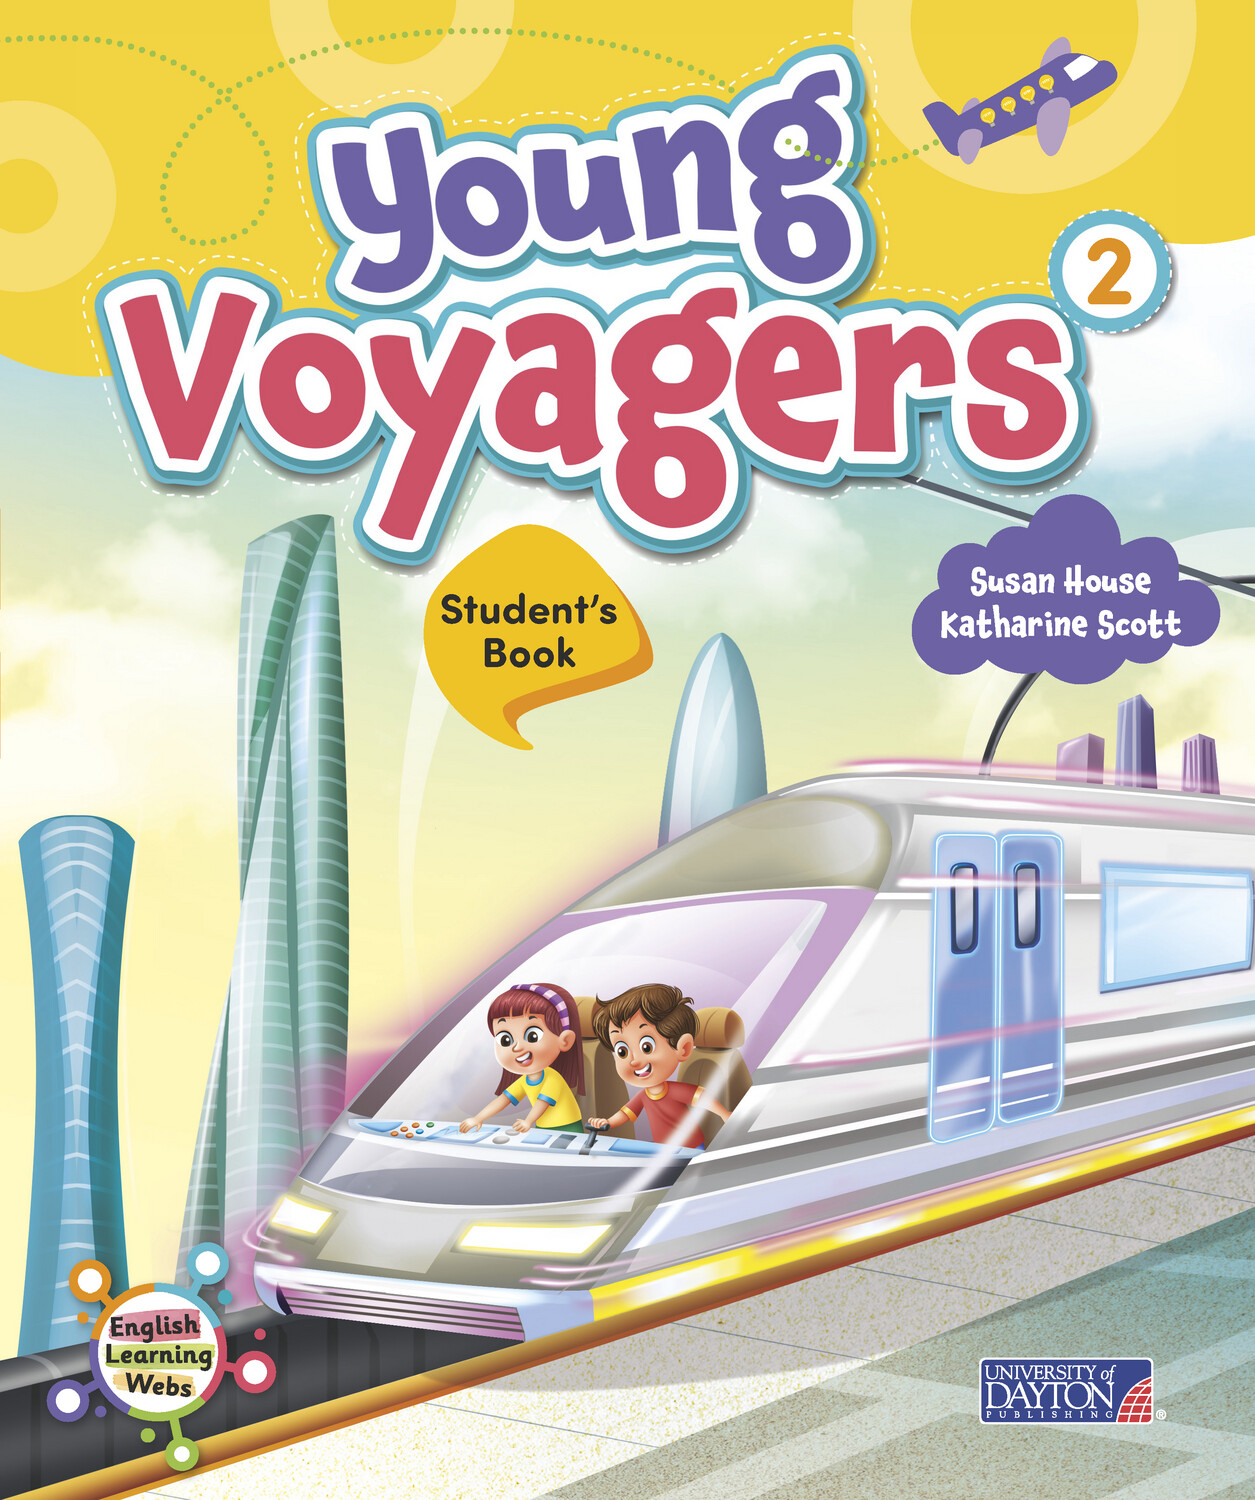 Young Voyagers 2 Primaria